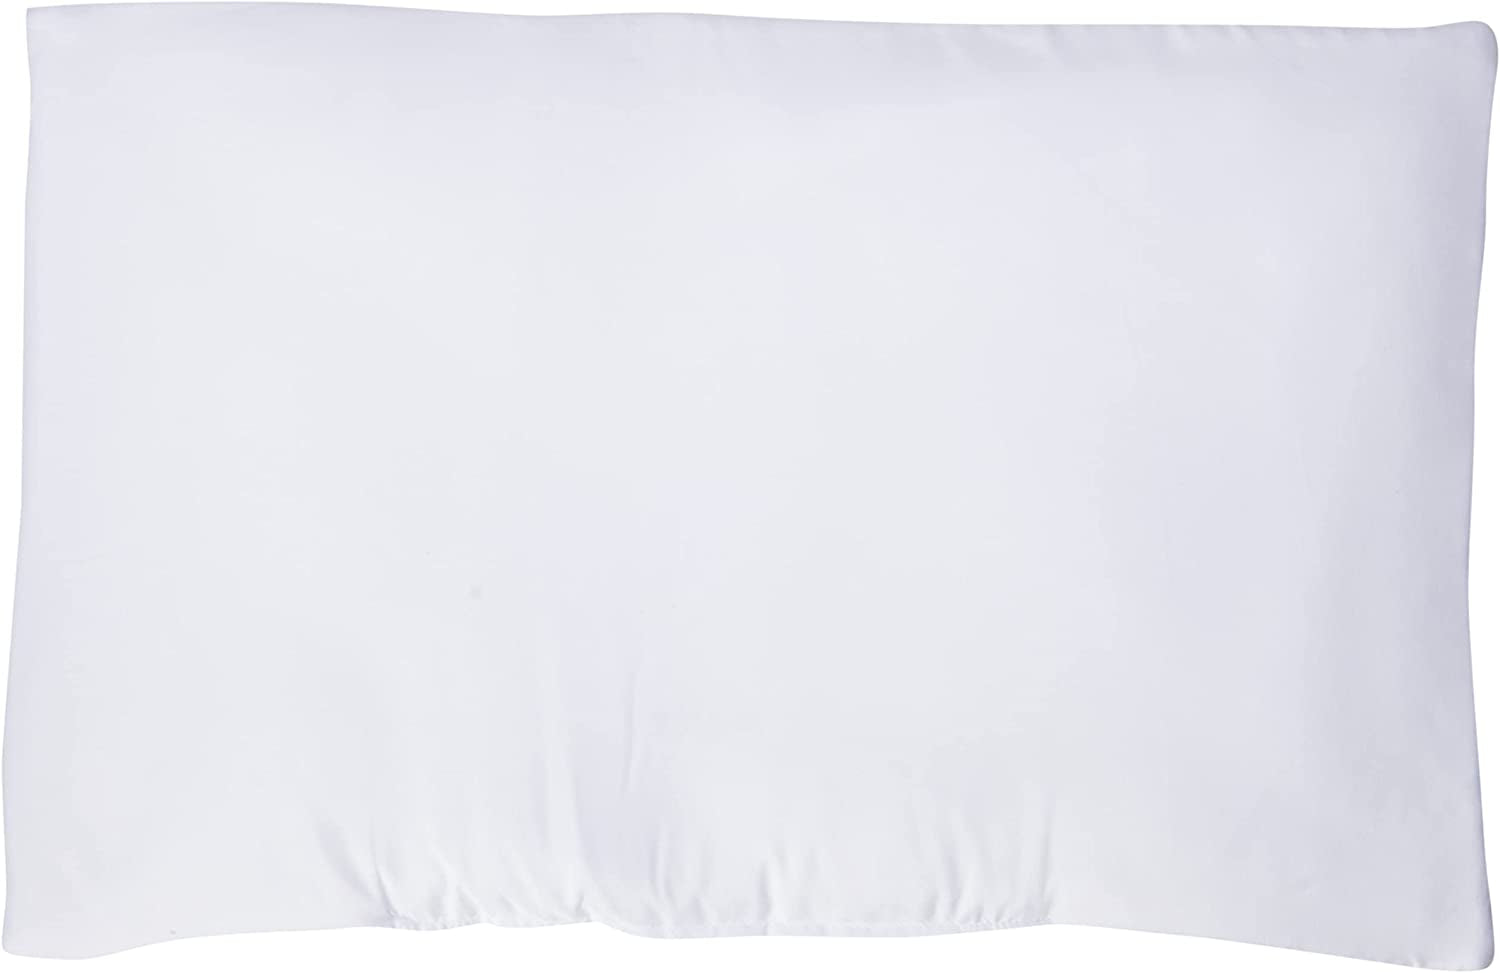 Baby's Comfort Duvet/Quilt and Pillow for Cot/Cotbed, White, 120 x 90 cm